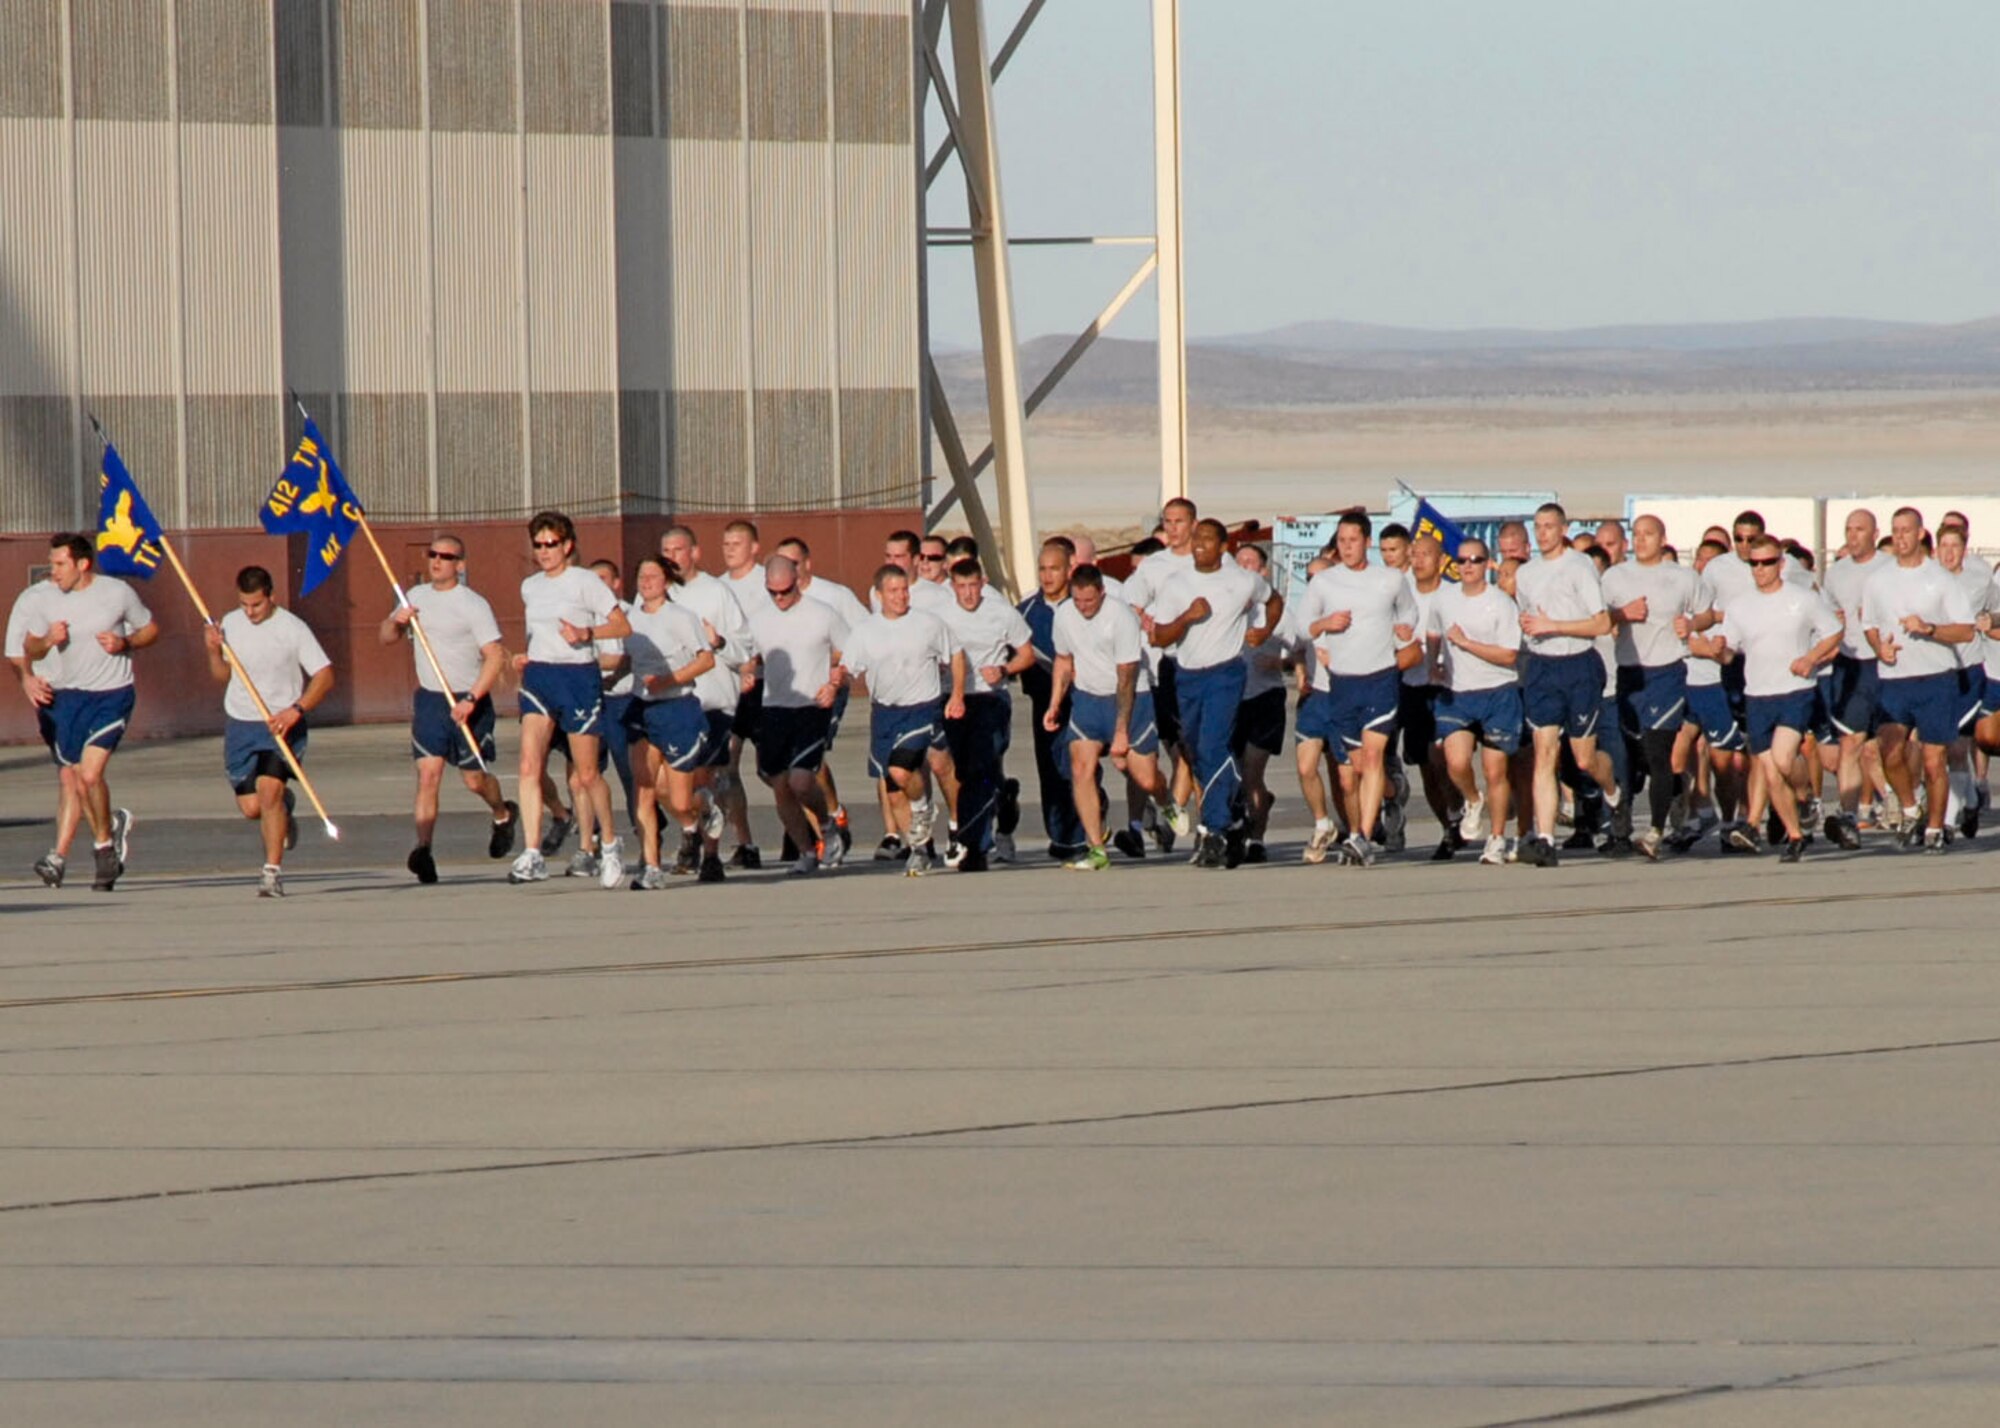 Members of the 412th Test Wing take a two-mile run on the historic Edwards flightline to round out Back in the Saddle day, the wing’s annual event that highlights the importance of safety, fitness, and teamwork to accomplish the mission of flight test. (U.S. Air Force Photo by Laura Mowry)